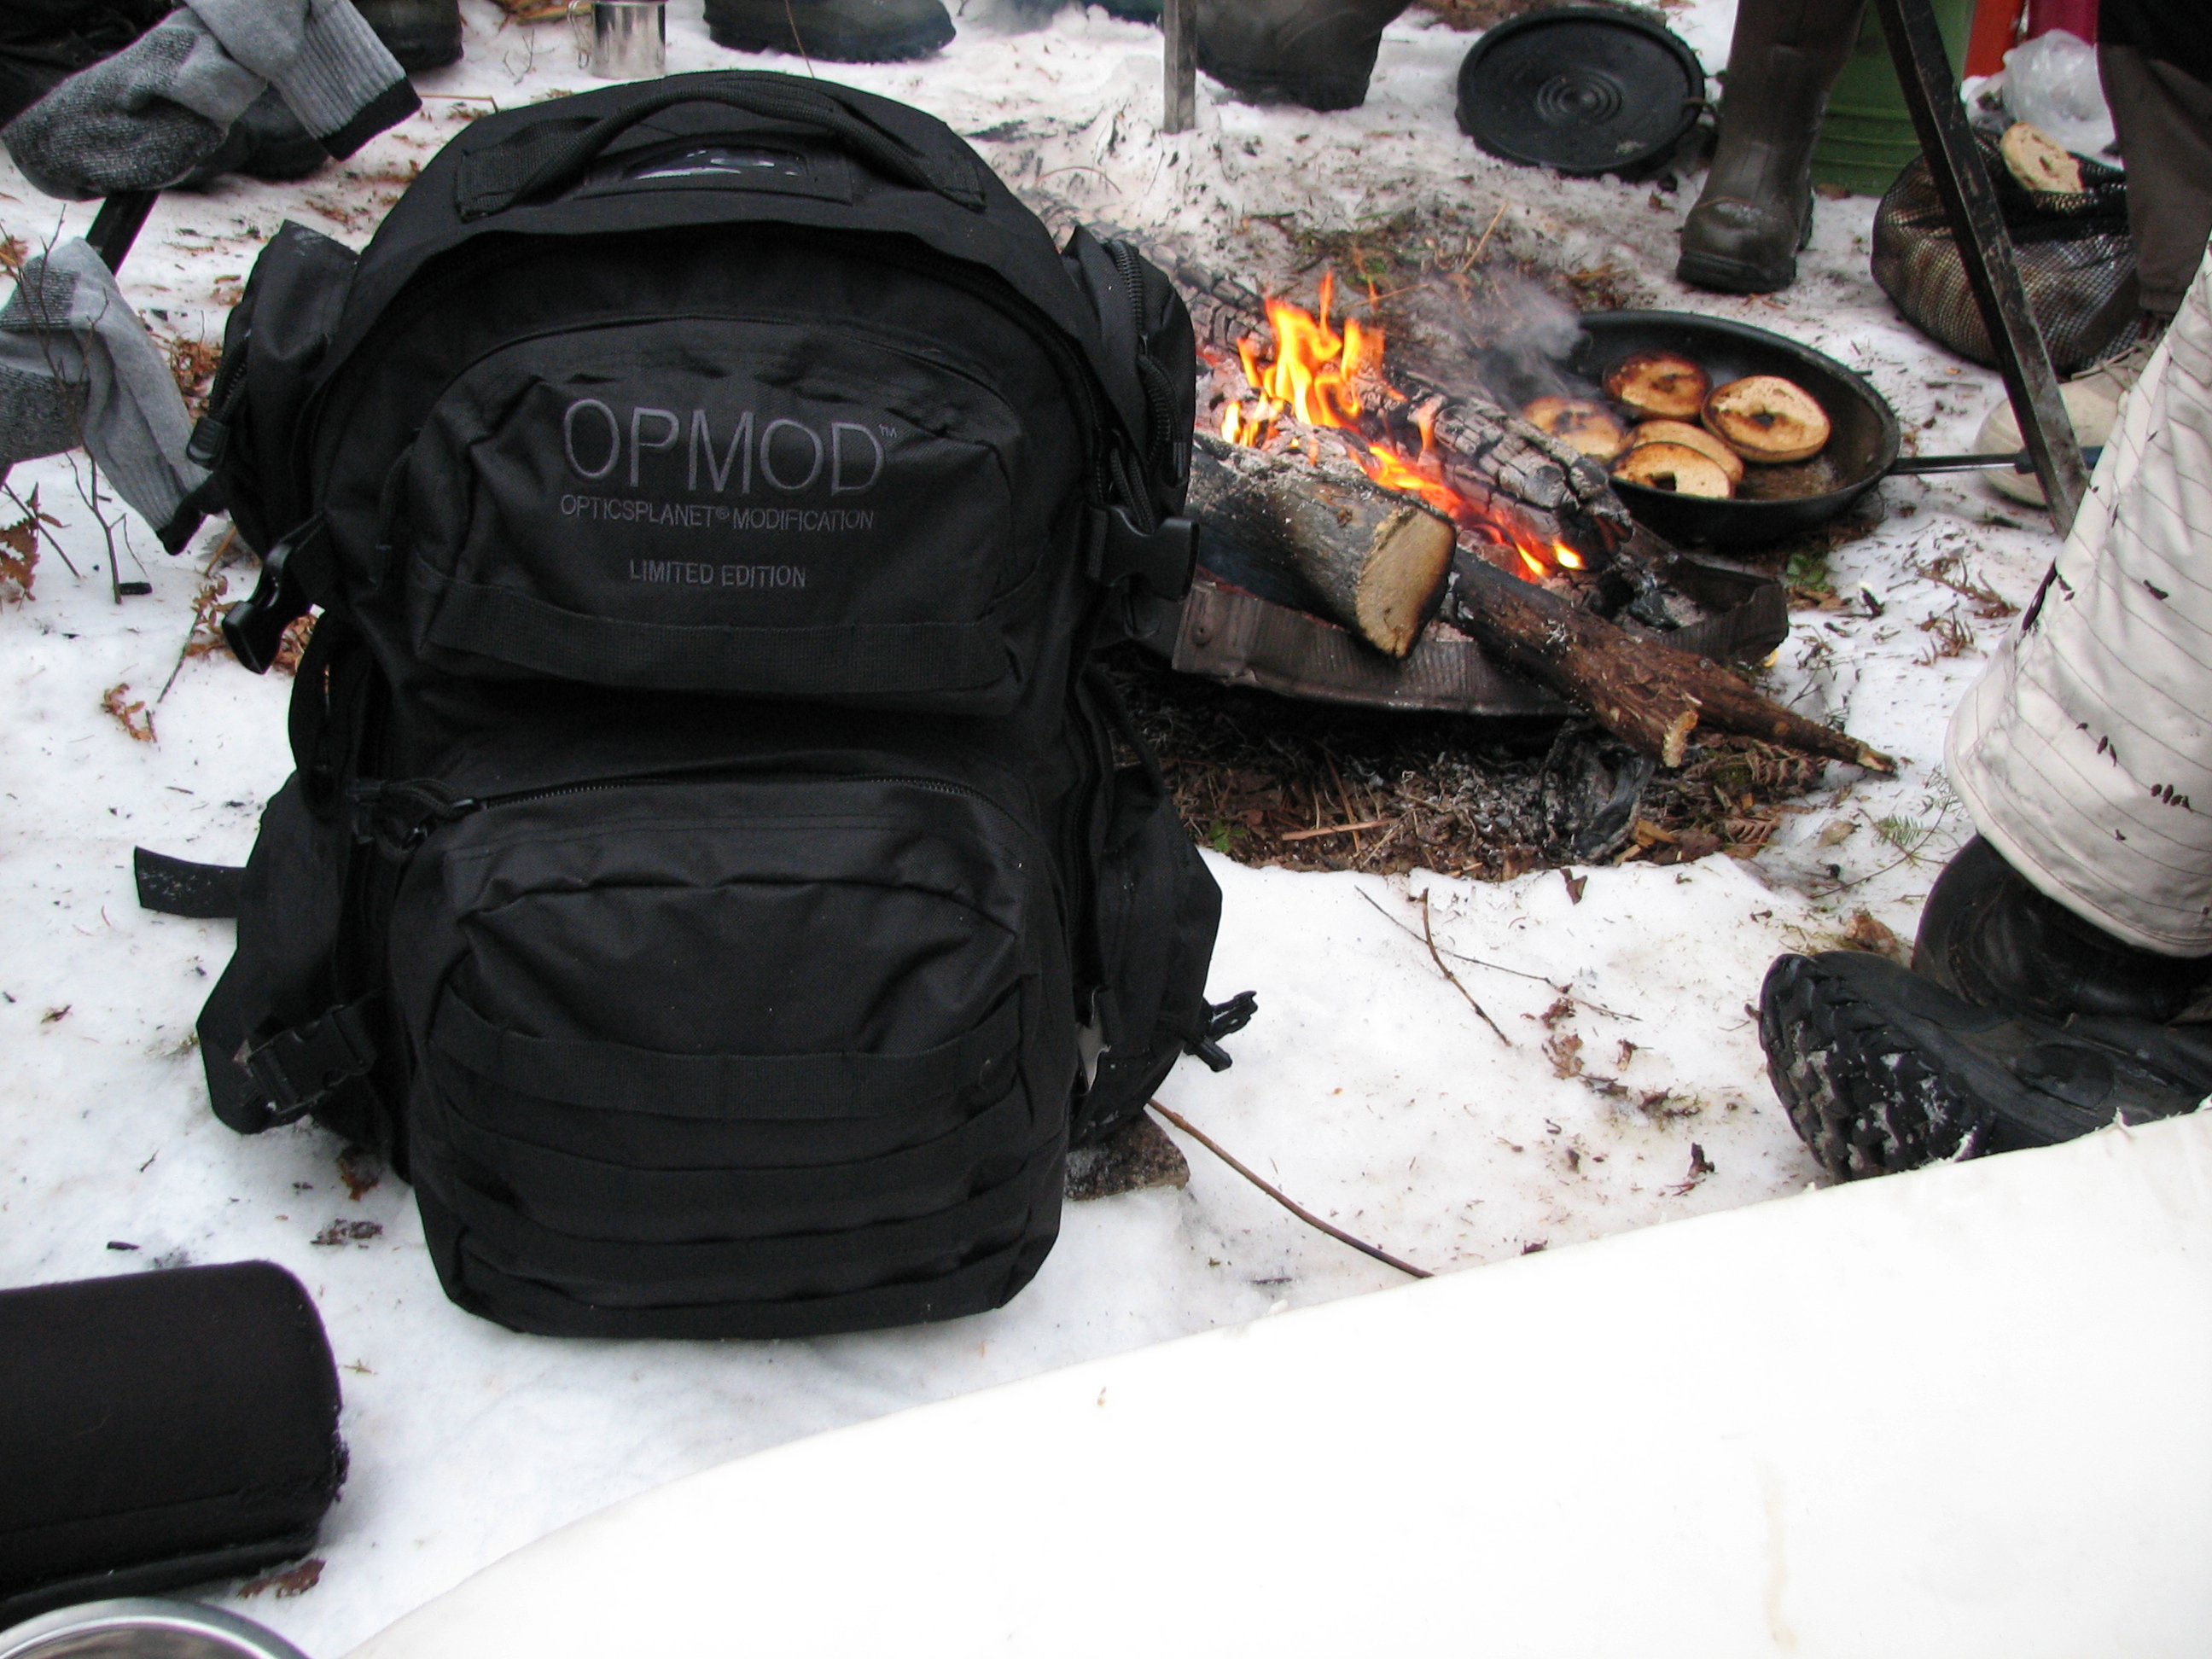 Fireside with OPMOD Bag